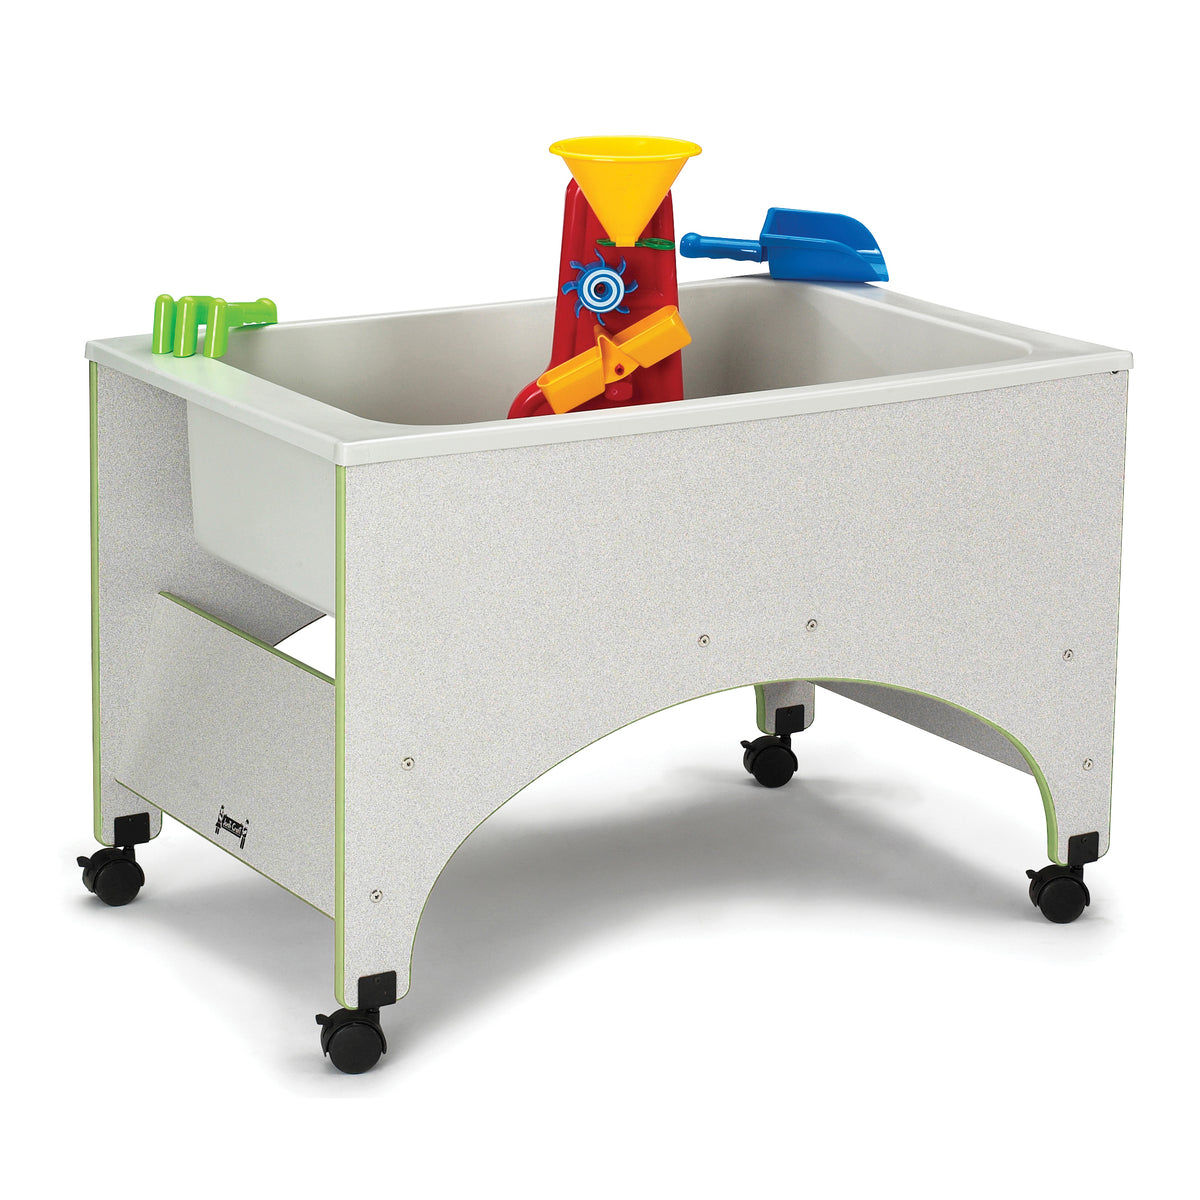 2857JC130, Rainbow Accents Space Saver Sensory Table - Key Lime Green